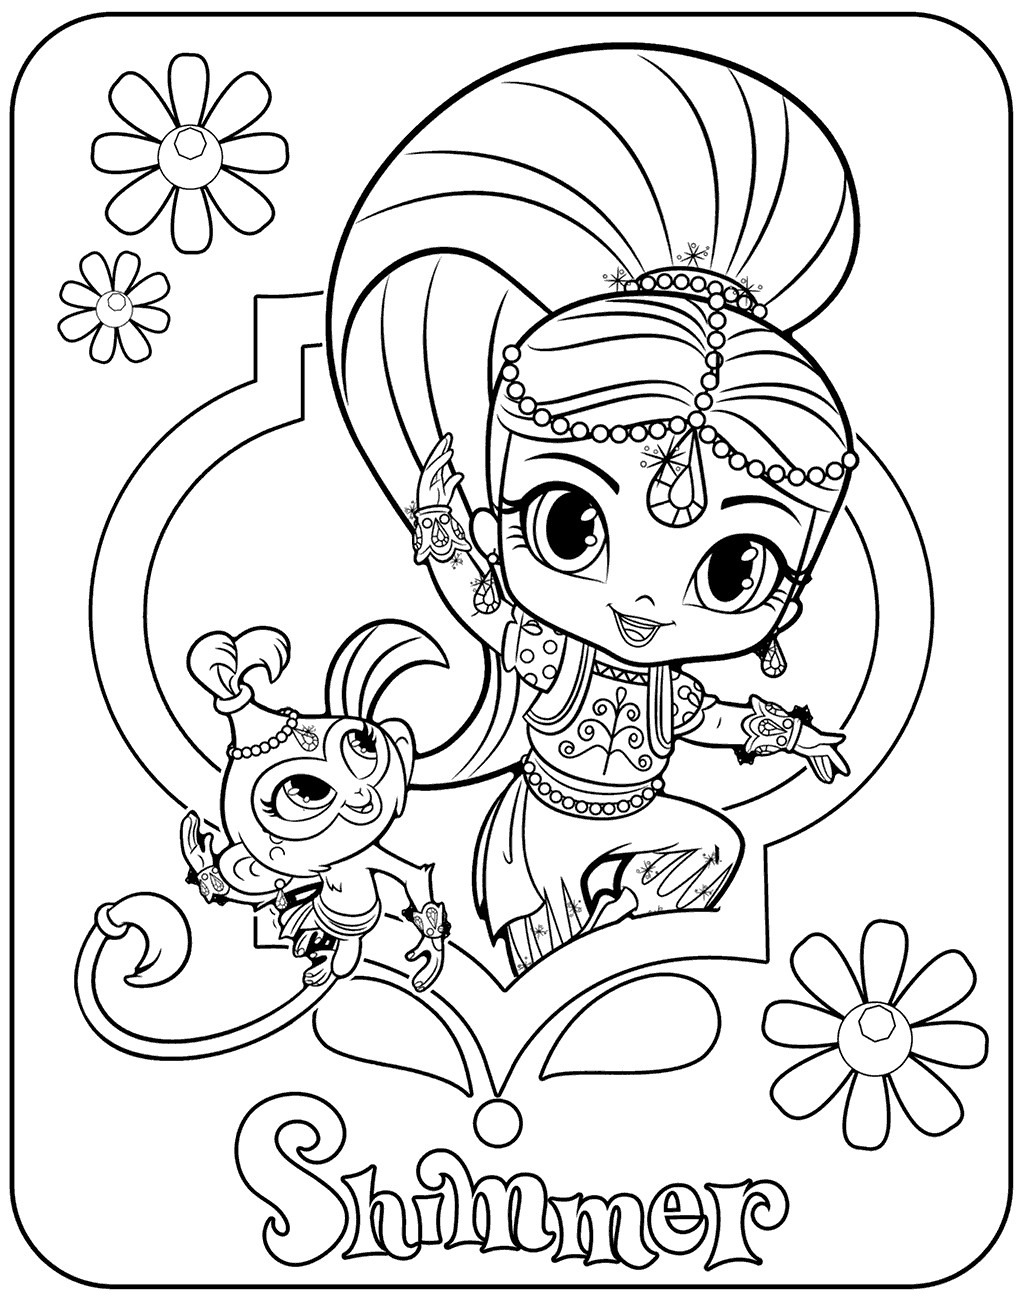 Shimmer And Shine Printable Coloring Pages
 Shimmer And Shine Coloring Pages 2017